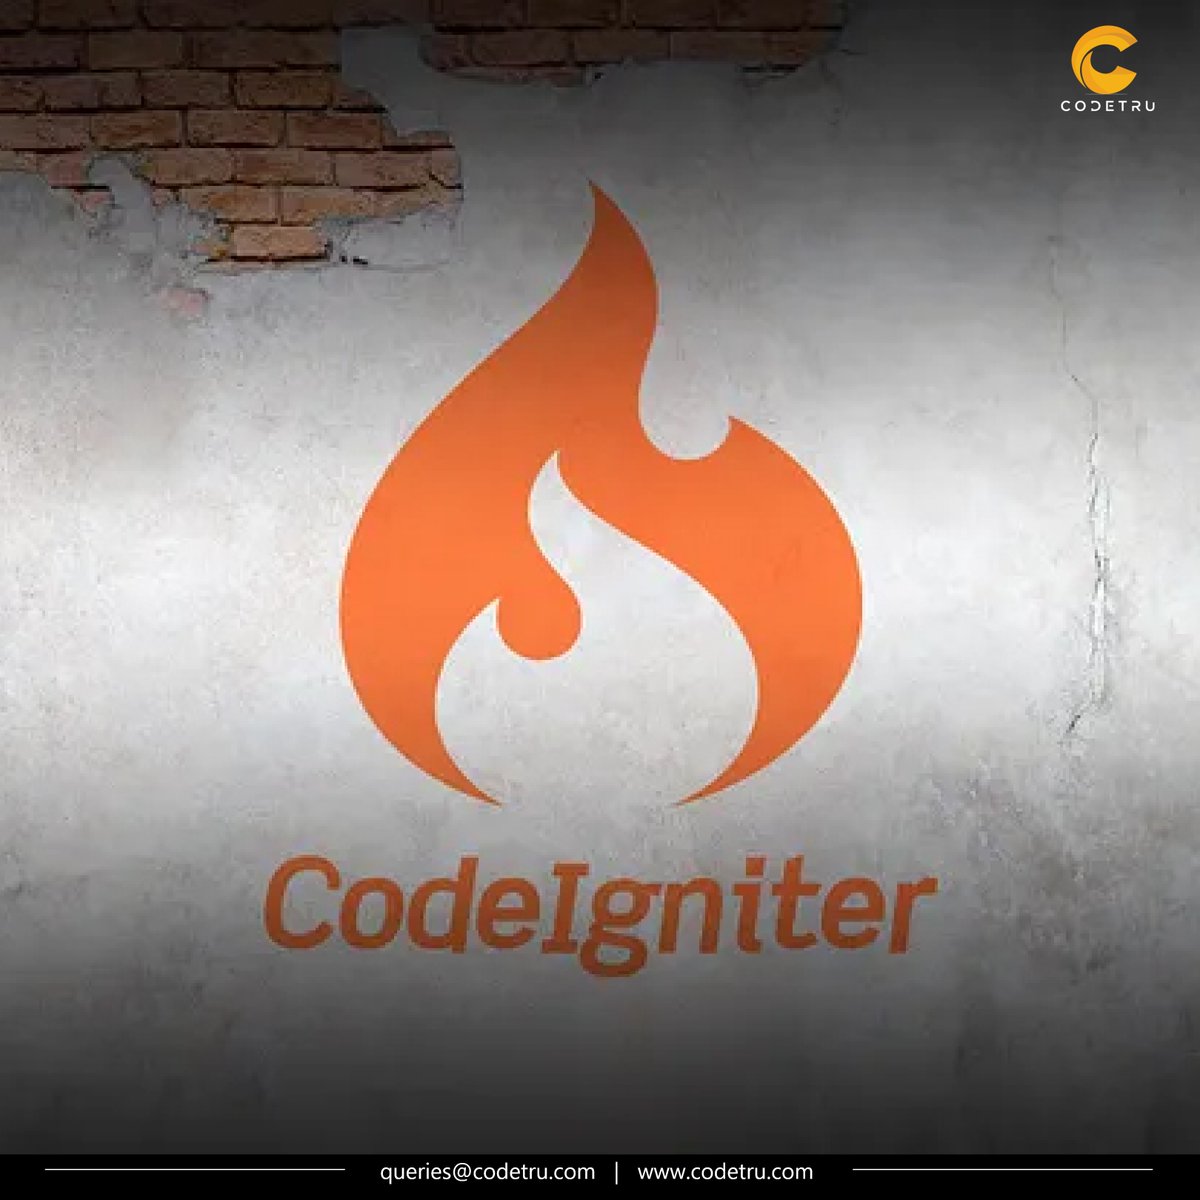 Unlock the benefits of Codeigniter, the best PHP framework, in our latest blog. Explore how Codeigniter boosts productivity, ensures security, and provides a scalable foundation for web apps.

blog.codetru.com/best-php-frame…

#PHPDevelopment #Codeigniter #TechInsights